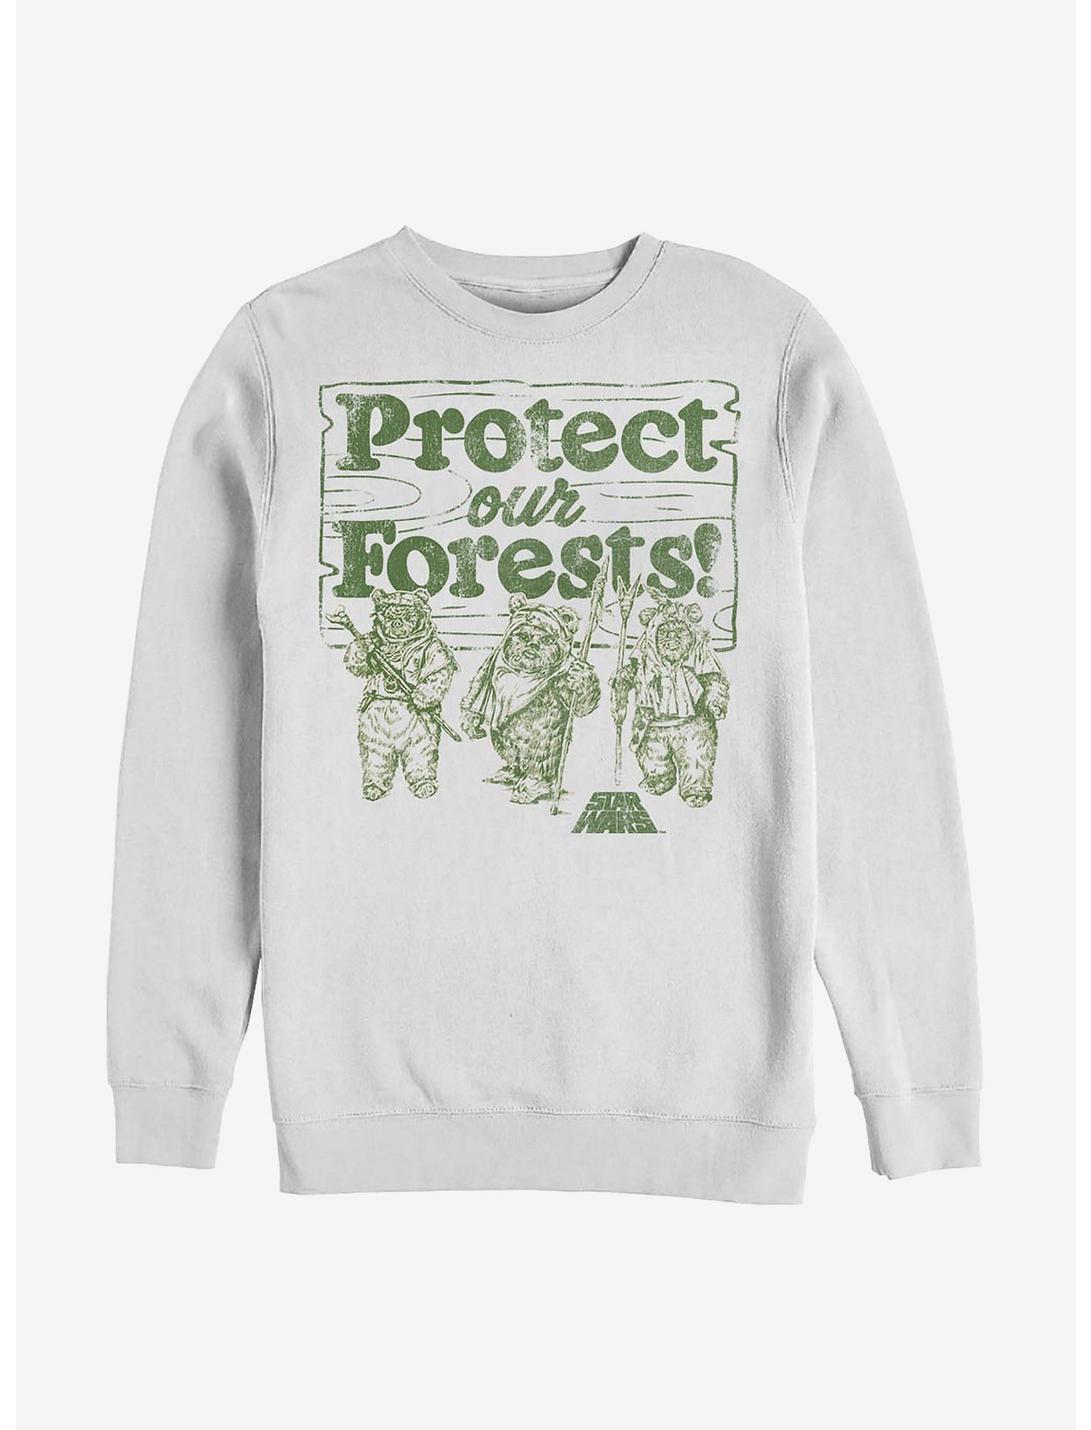 Star Wars Protect Our Forests Crew Sweatshirt, WHITE, hi-res